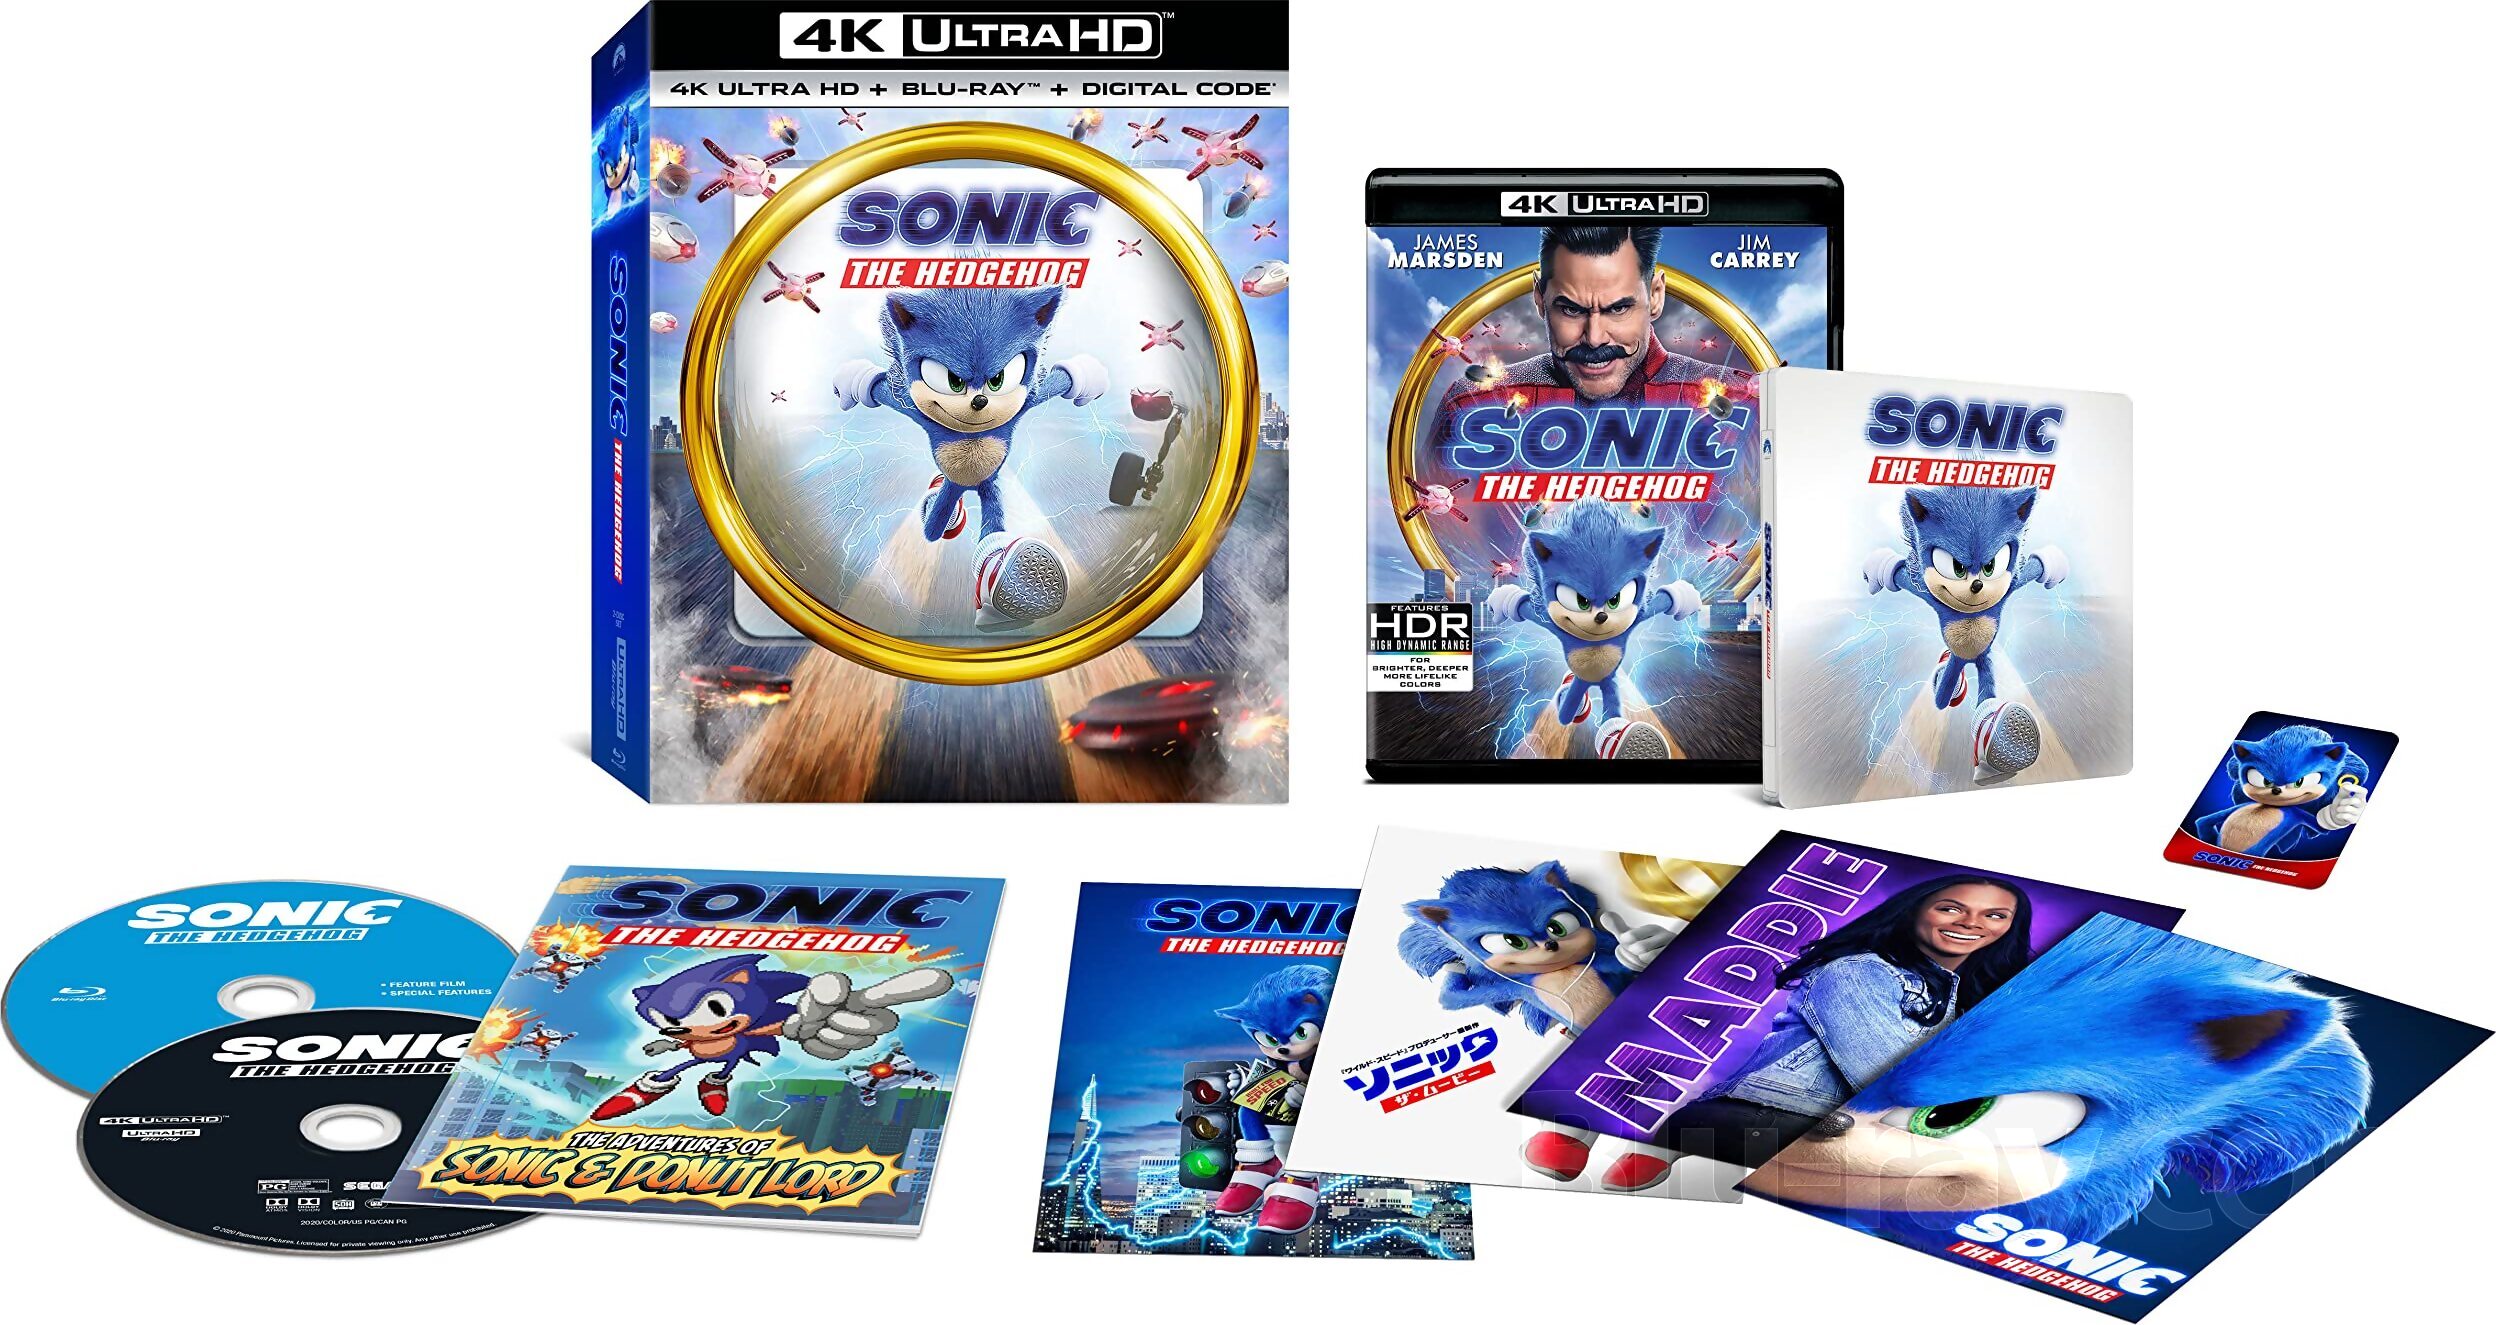 Sonic The Hedgehog 2-Movie Collection - Limited Edition Steelbook